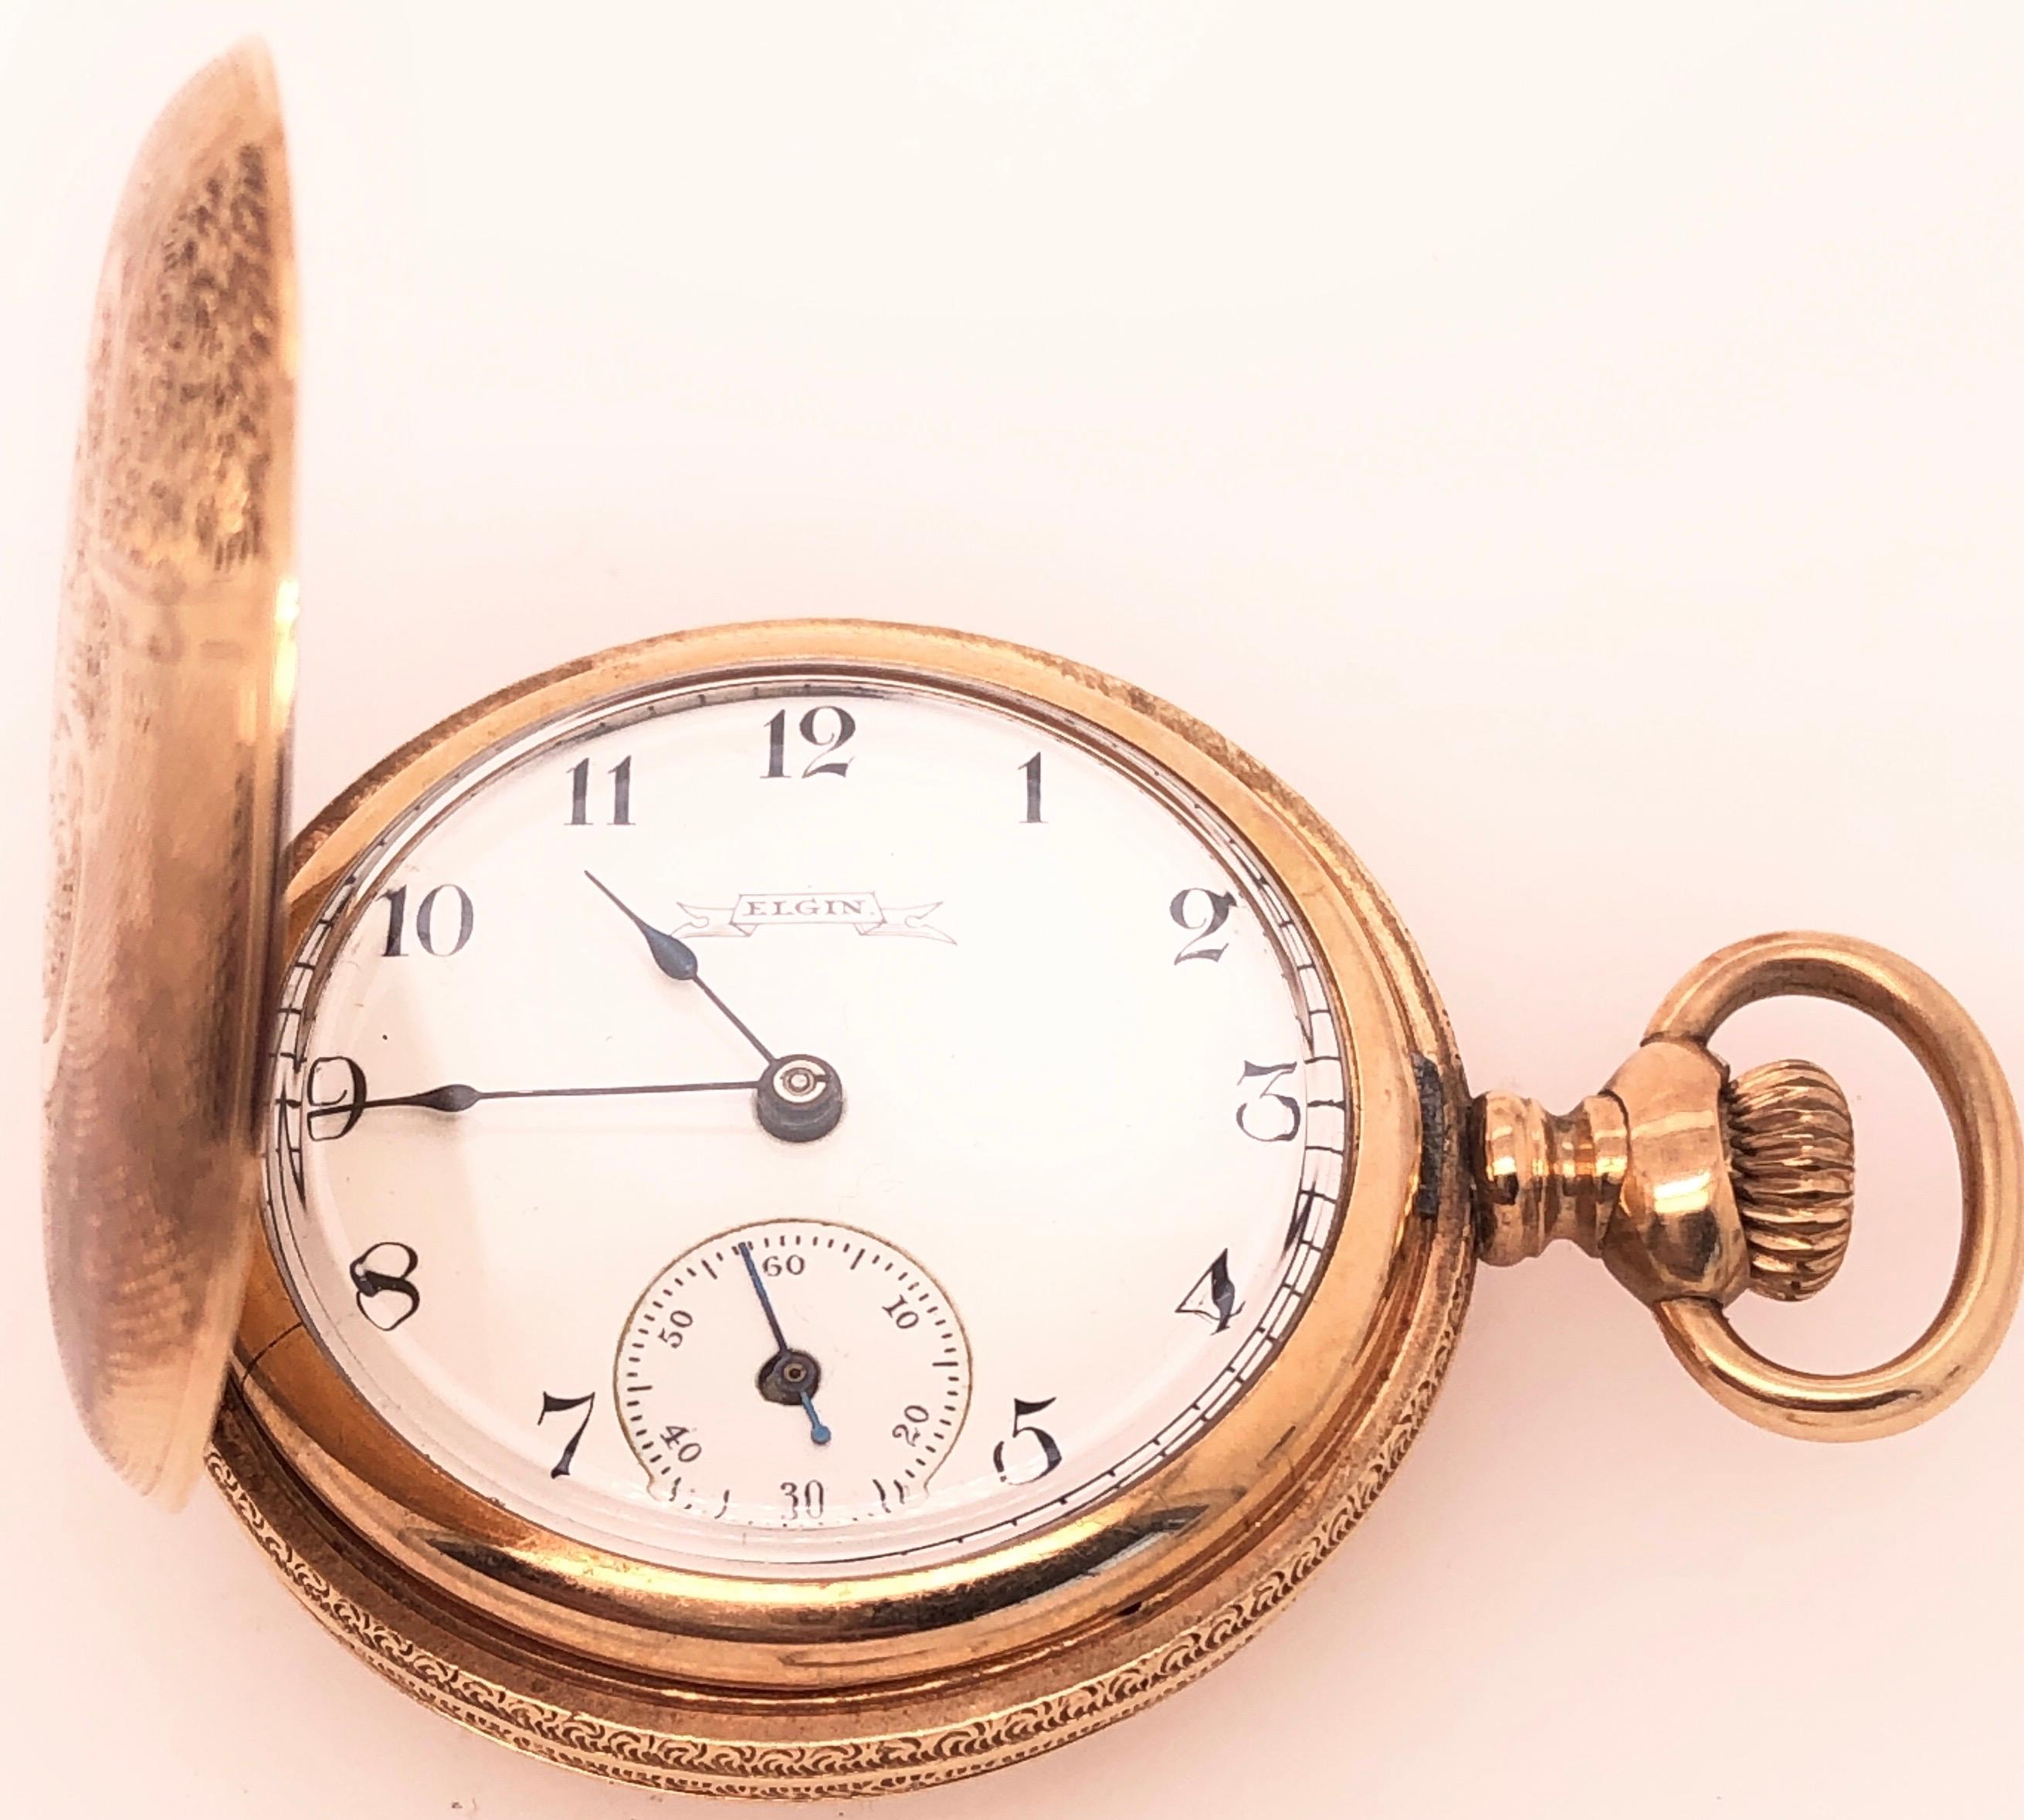 Antique Elgin 14 Karat  Yellow Gold Pocket Watch.
This beautiful antique Elgin pocket watch circa 1895 is a true collectible. The hunting case has an inner dust cover and is set with a beautiful engraved. It is 32 mm diameter, movement no. 14975105.